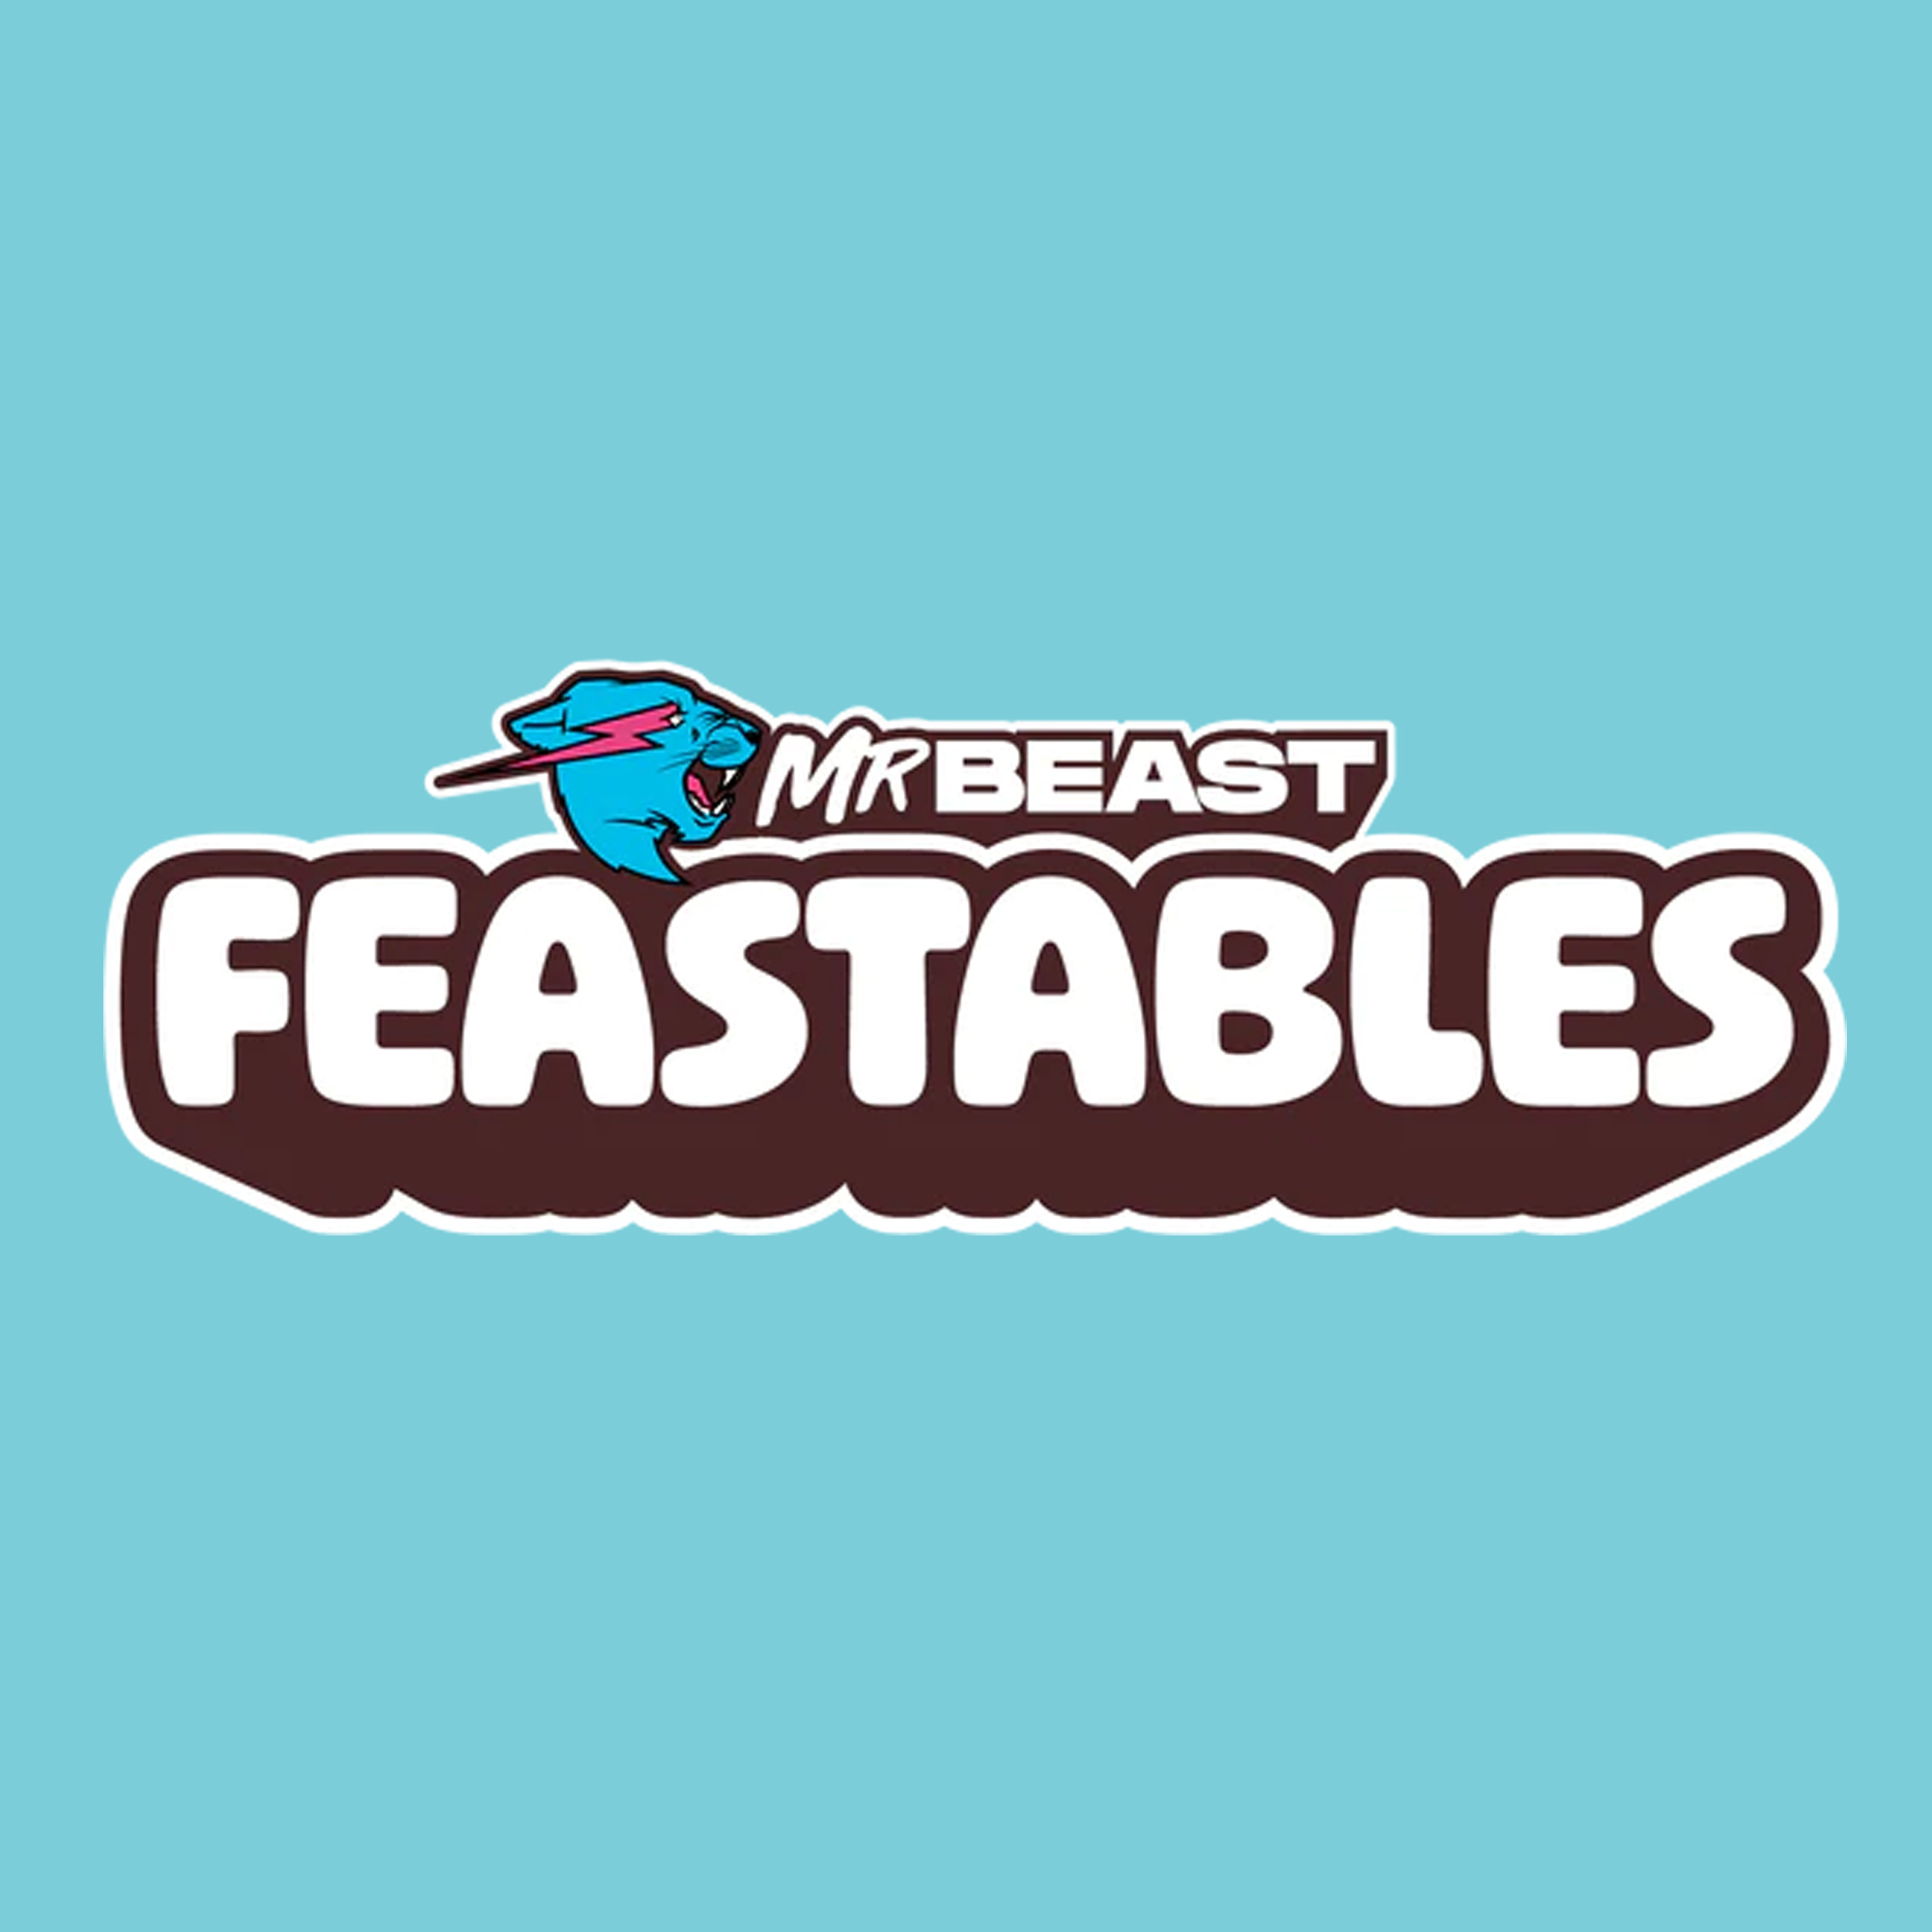 MrBeast and Corpse Husband have teamed up to launch the latest